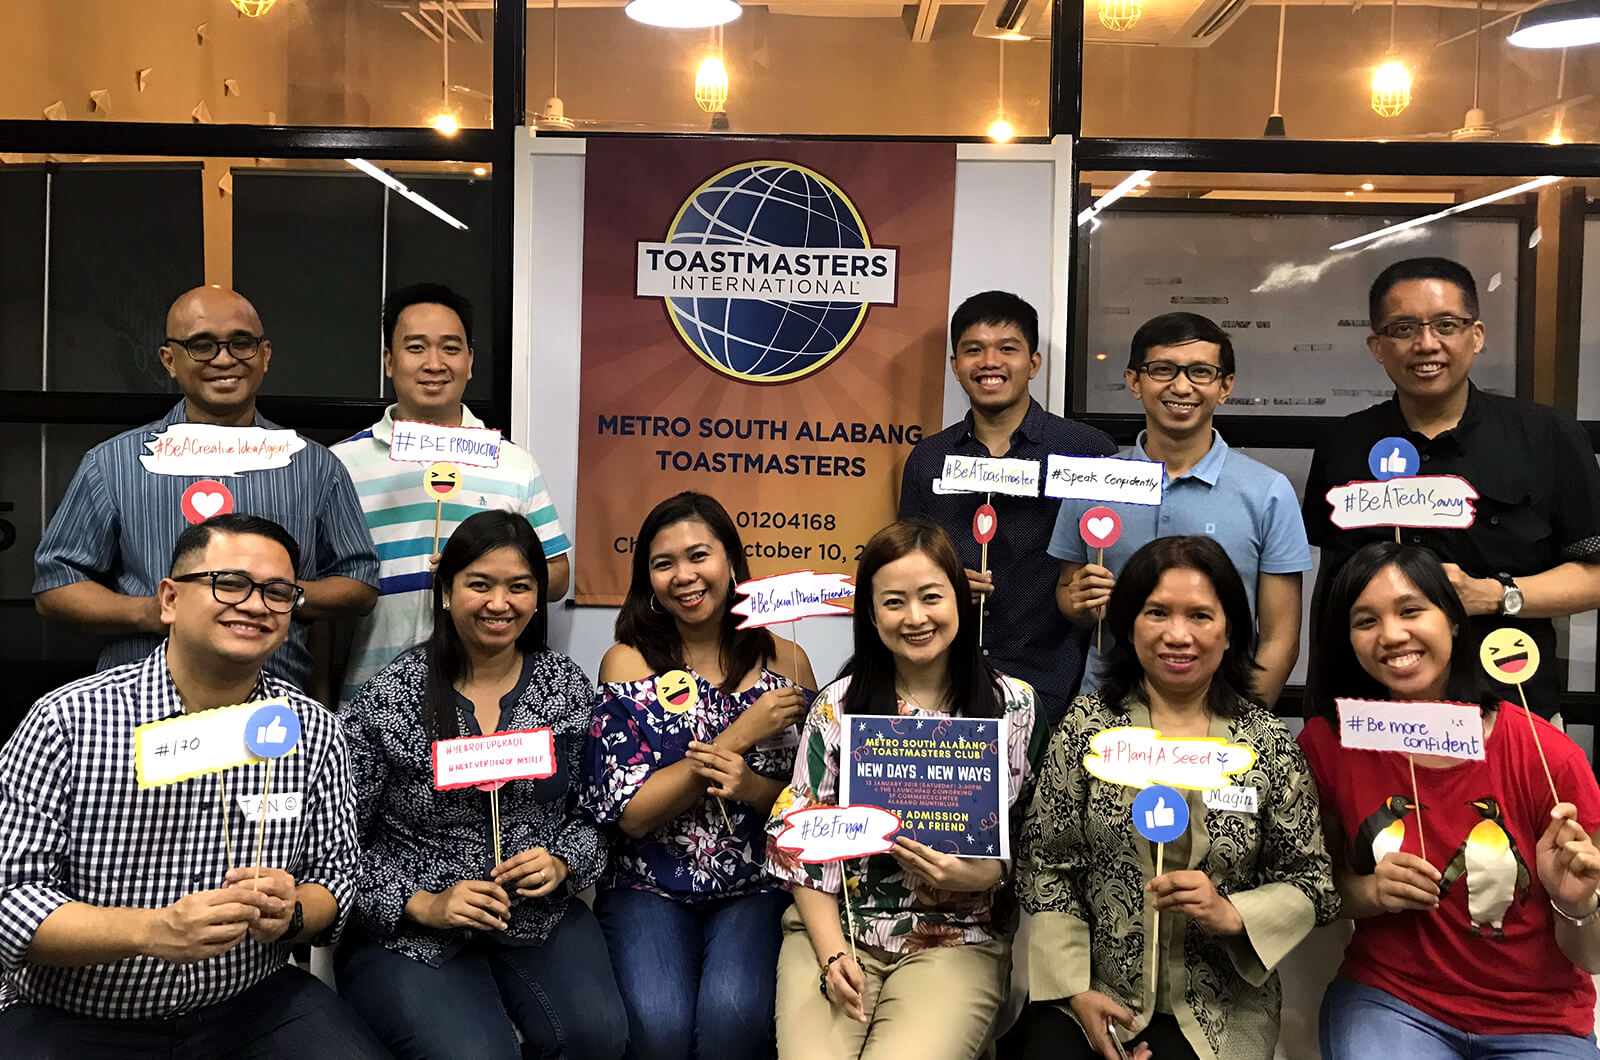 Manila’s Metro South Alabang Toastmasters club try a “New Days, New Ways” theme during a fun meeting.